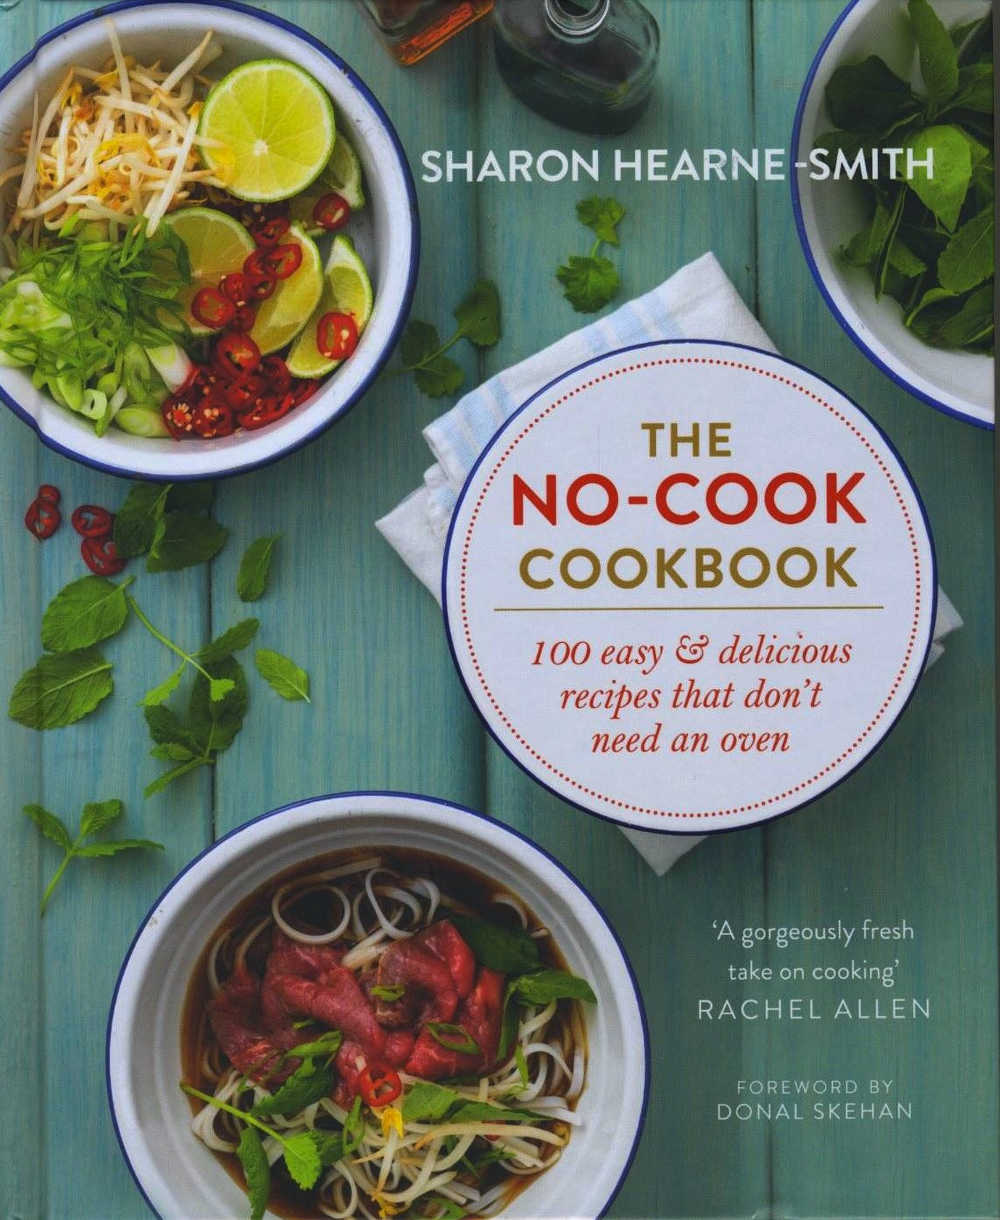 The No-Cook Cookbook (Quercus Books, â‚¬24.99/Â£20.00; also available in Kindle, Â£13.99; Foreword by Donal Skehan)